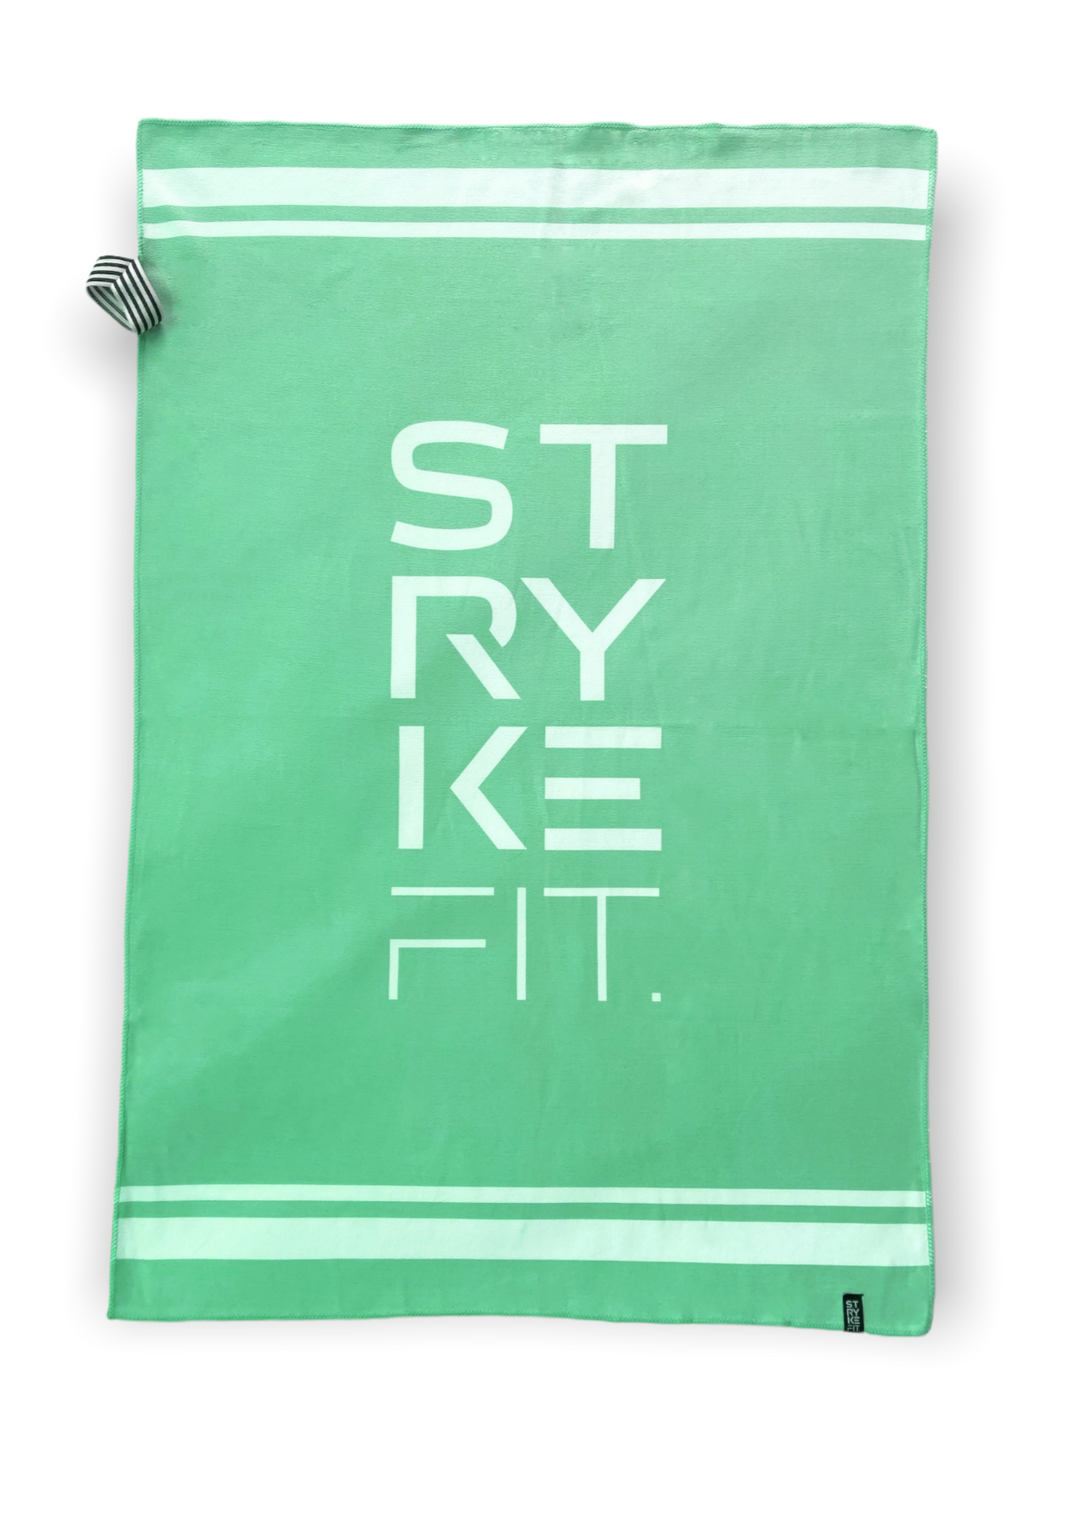 TRAINING TOWEL  -The perfect training towel is an important part of any training session. Our towel is designed to ensure you stay dry through any workout, whether your go-to is running, yoga, pilates   gym, or any other sport. Lightweight and compact, the perfect size to throw in your training bag, this towel will be a staple.